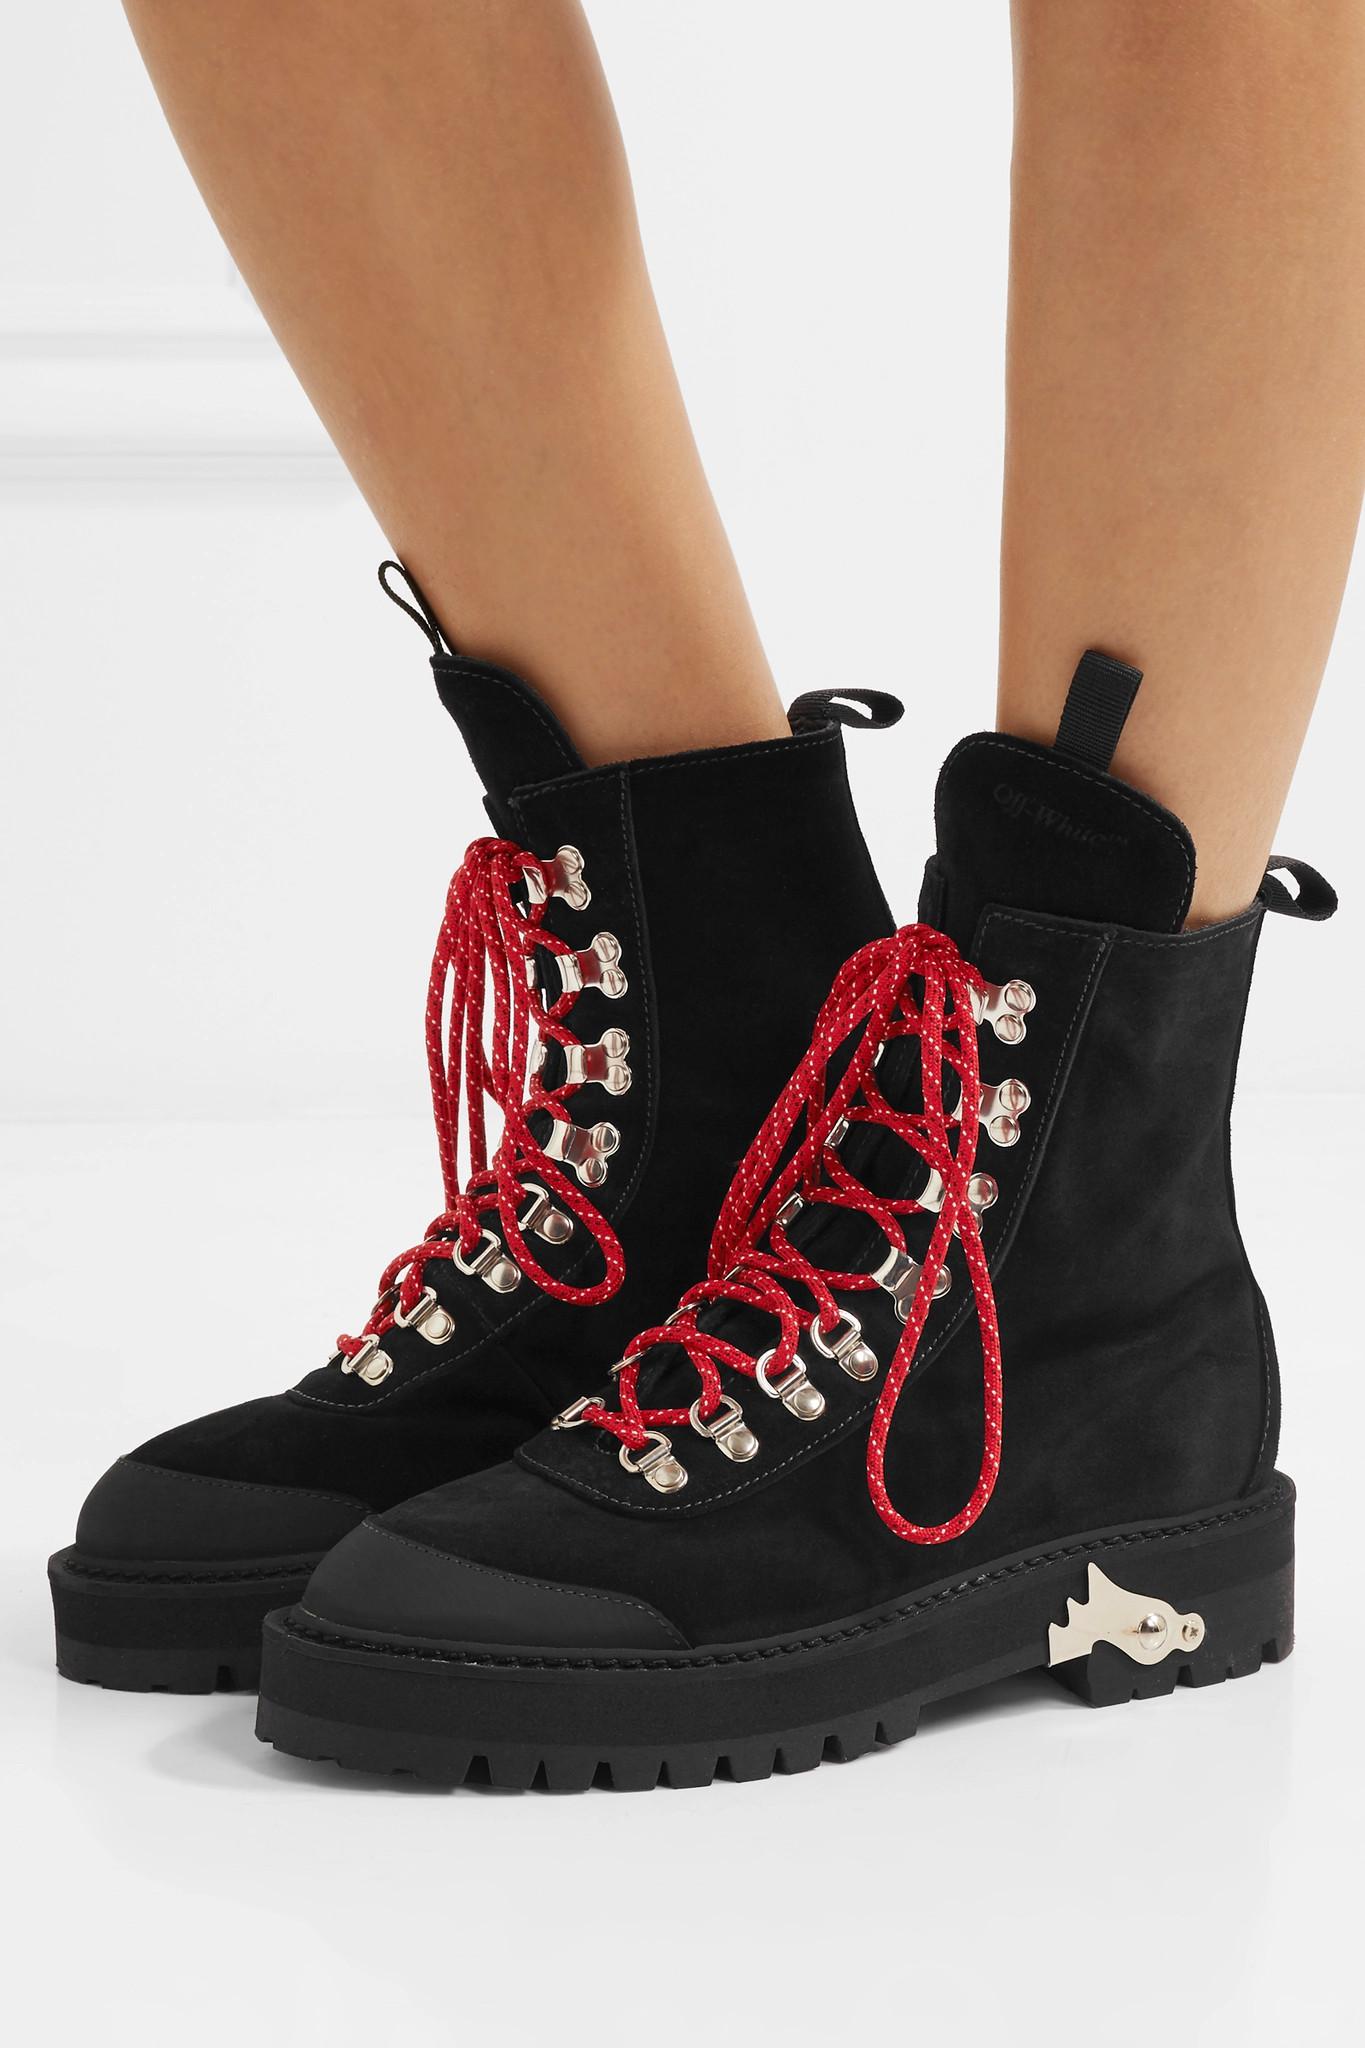 Off-White c/o Virgil Abloh Hiking Mountain Boots in Black | Lyst